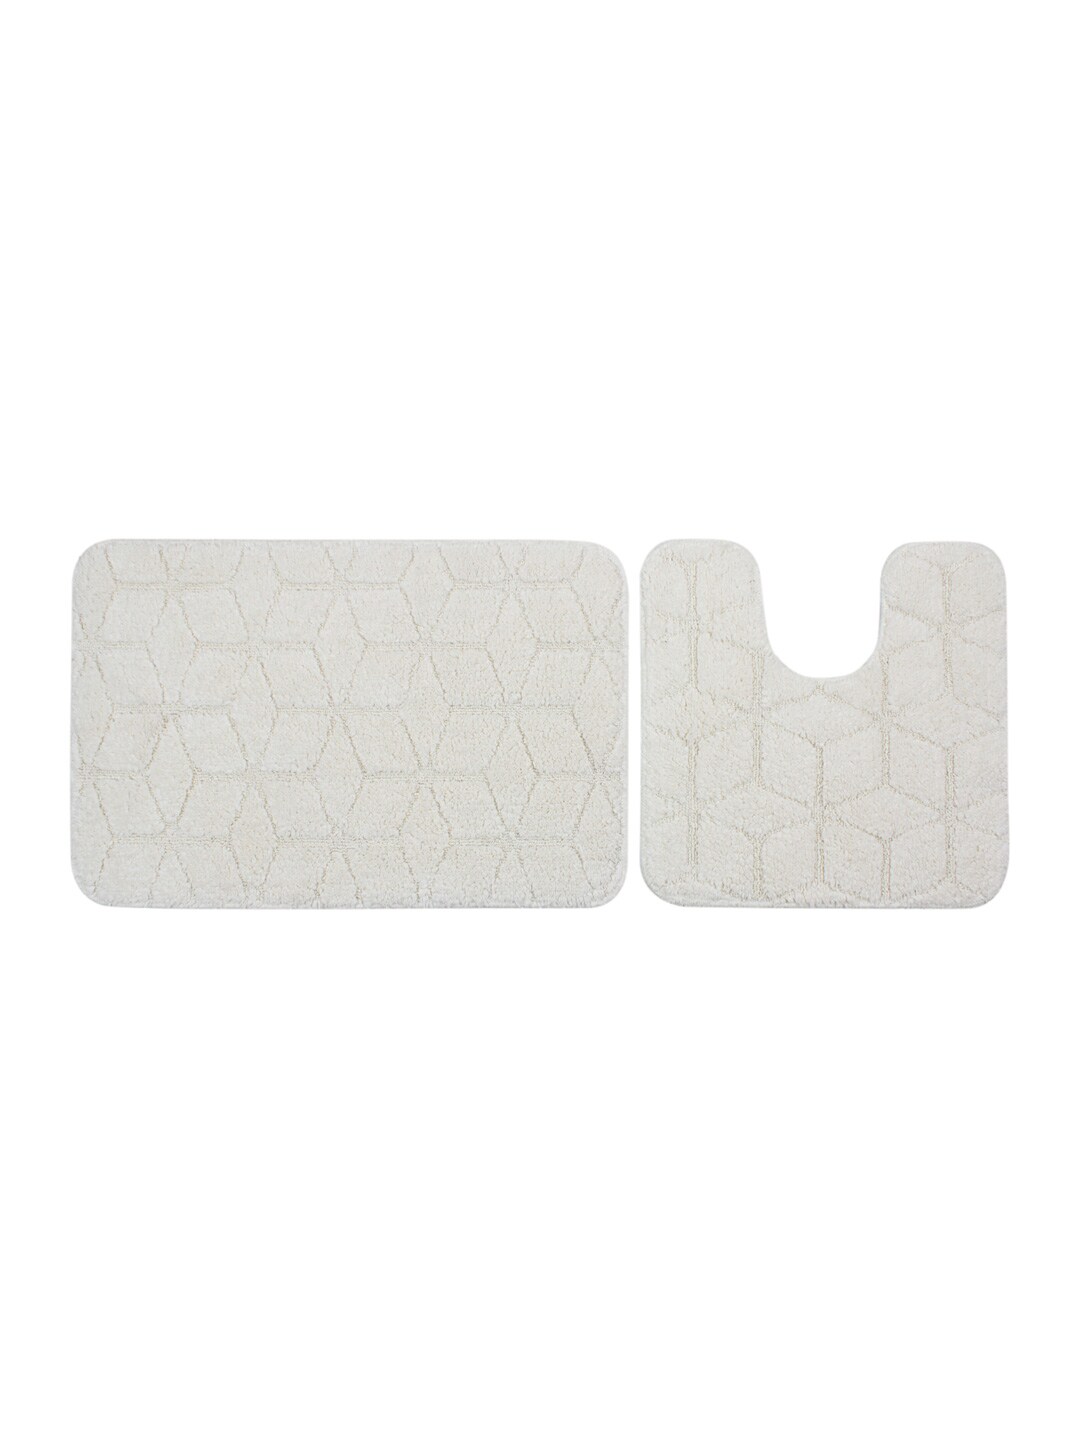 Saral Home White Set of 2 Rectangular Bath Rugs Price in India